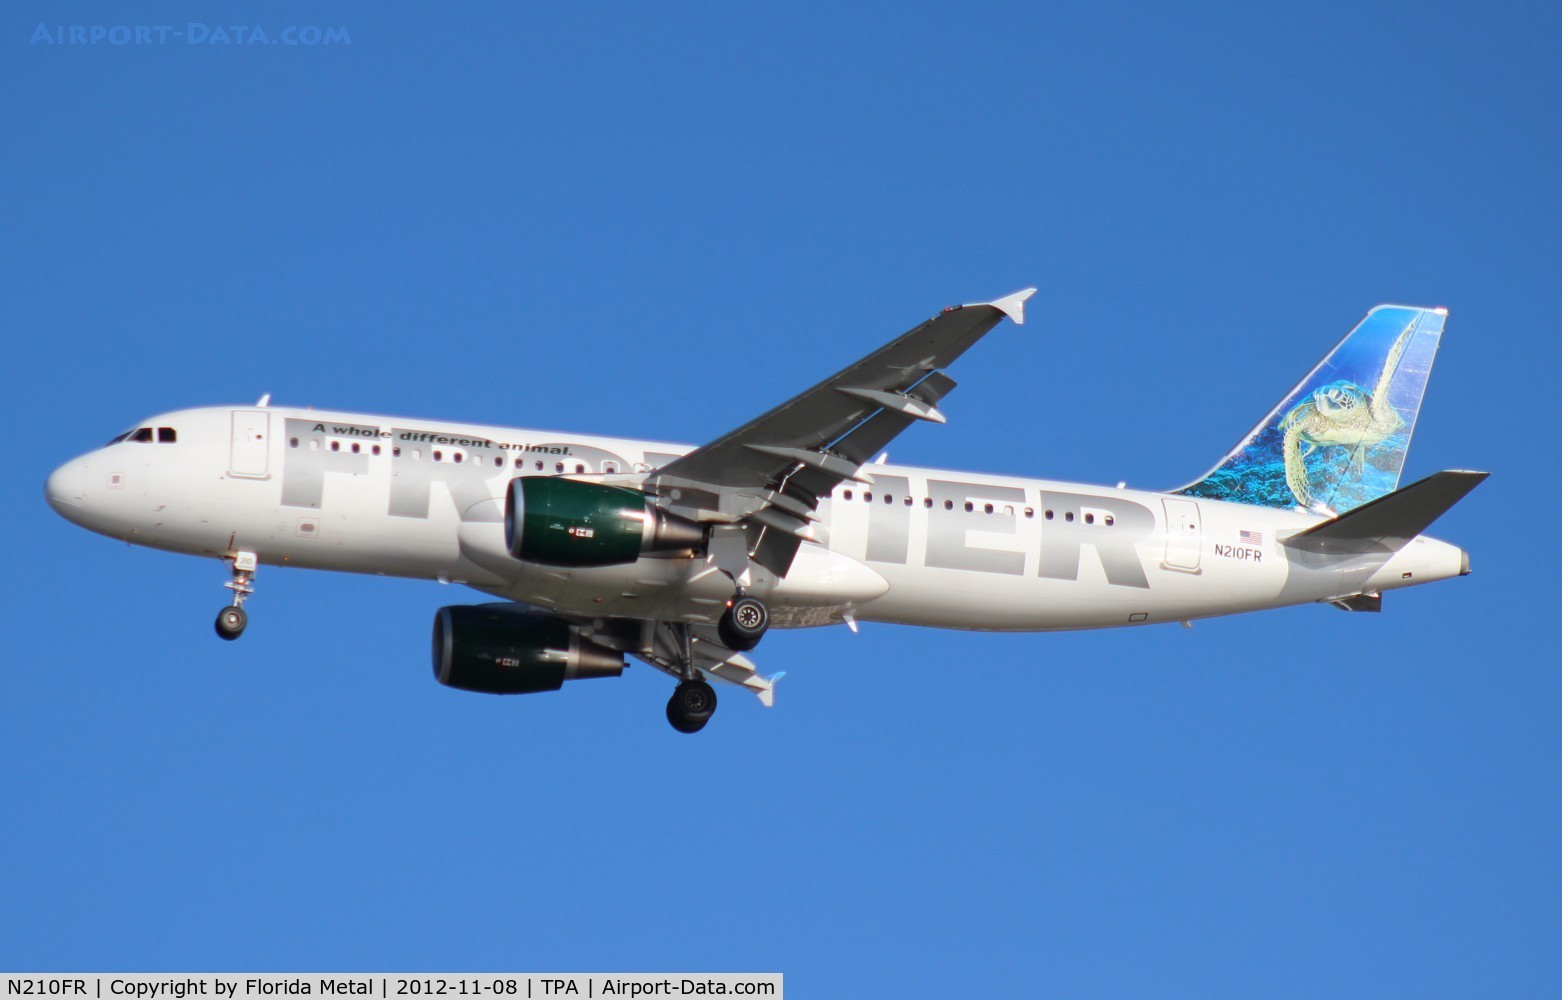 N210FR, 2011 Airbus A320-214 C/N 4668, Frontier Sheldon the Sea Turtle A320